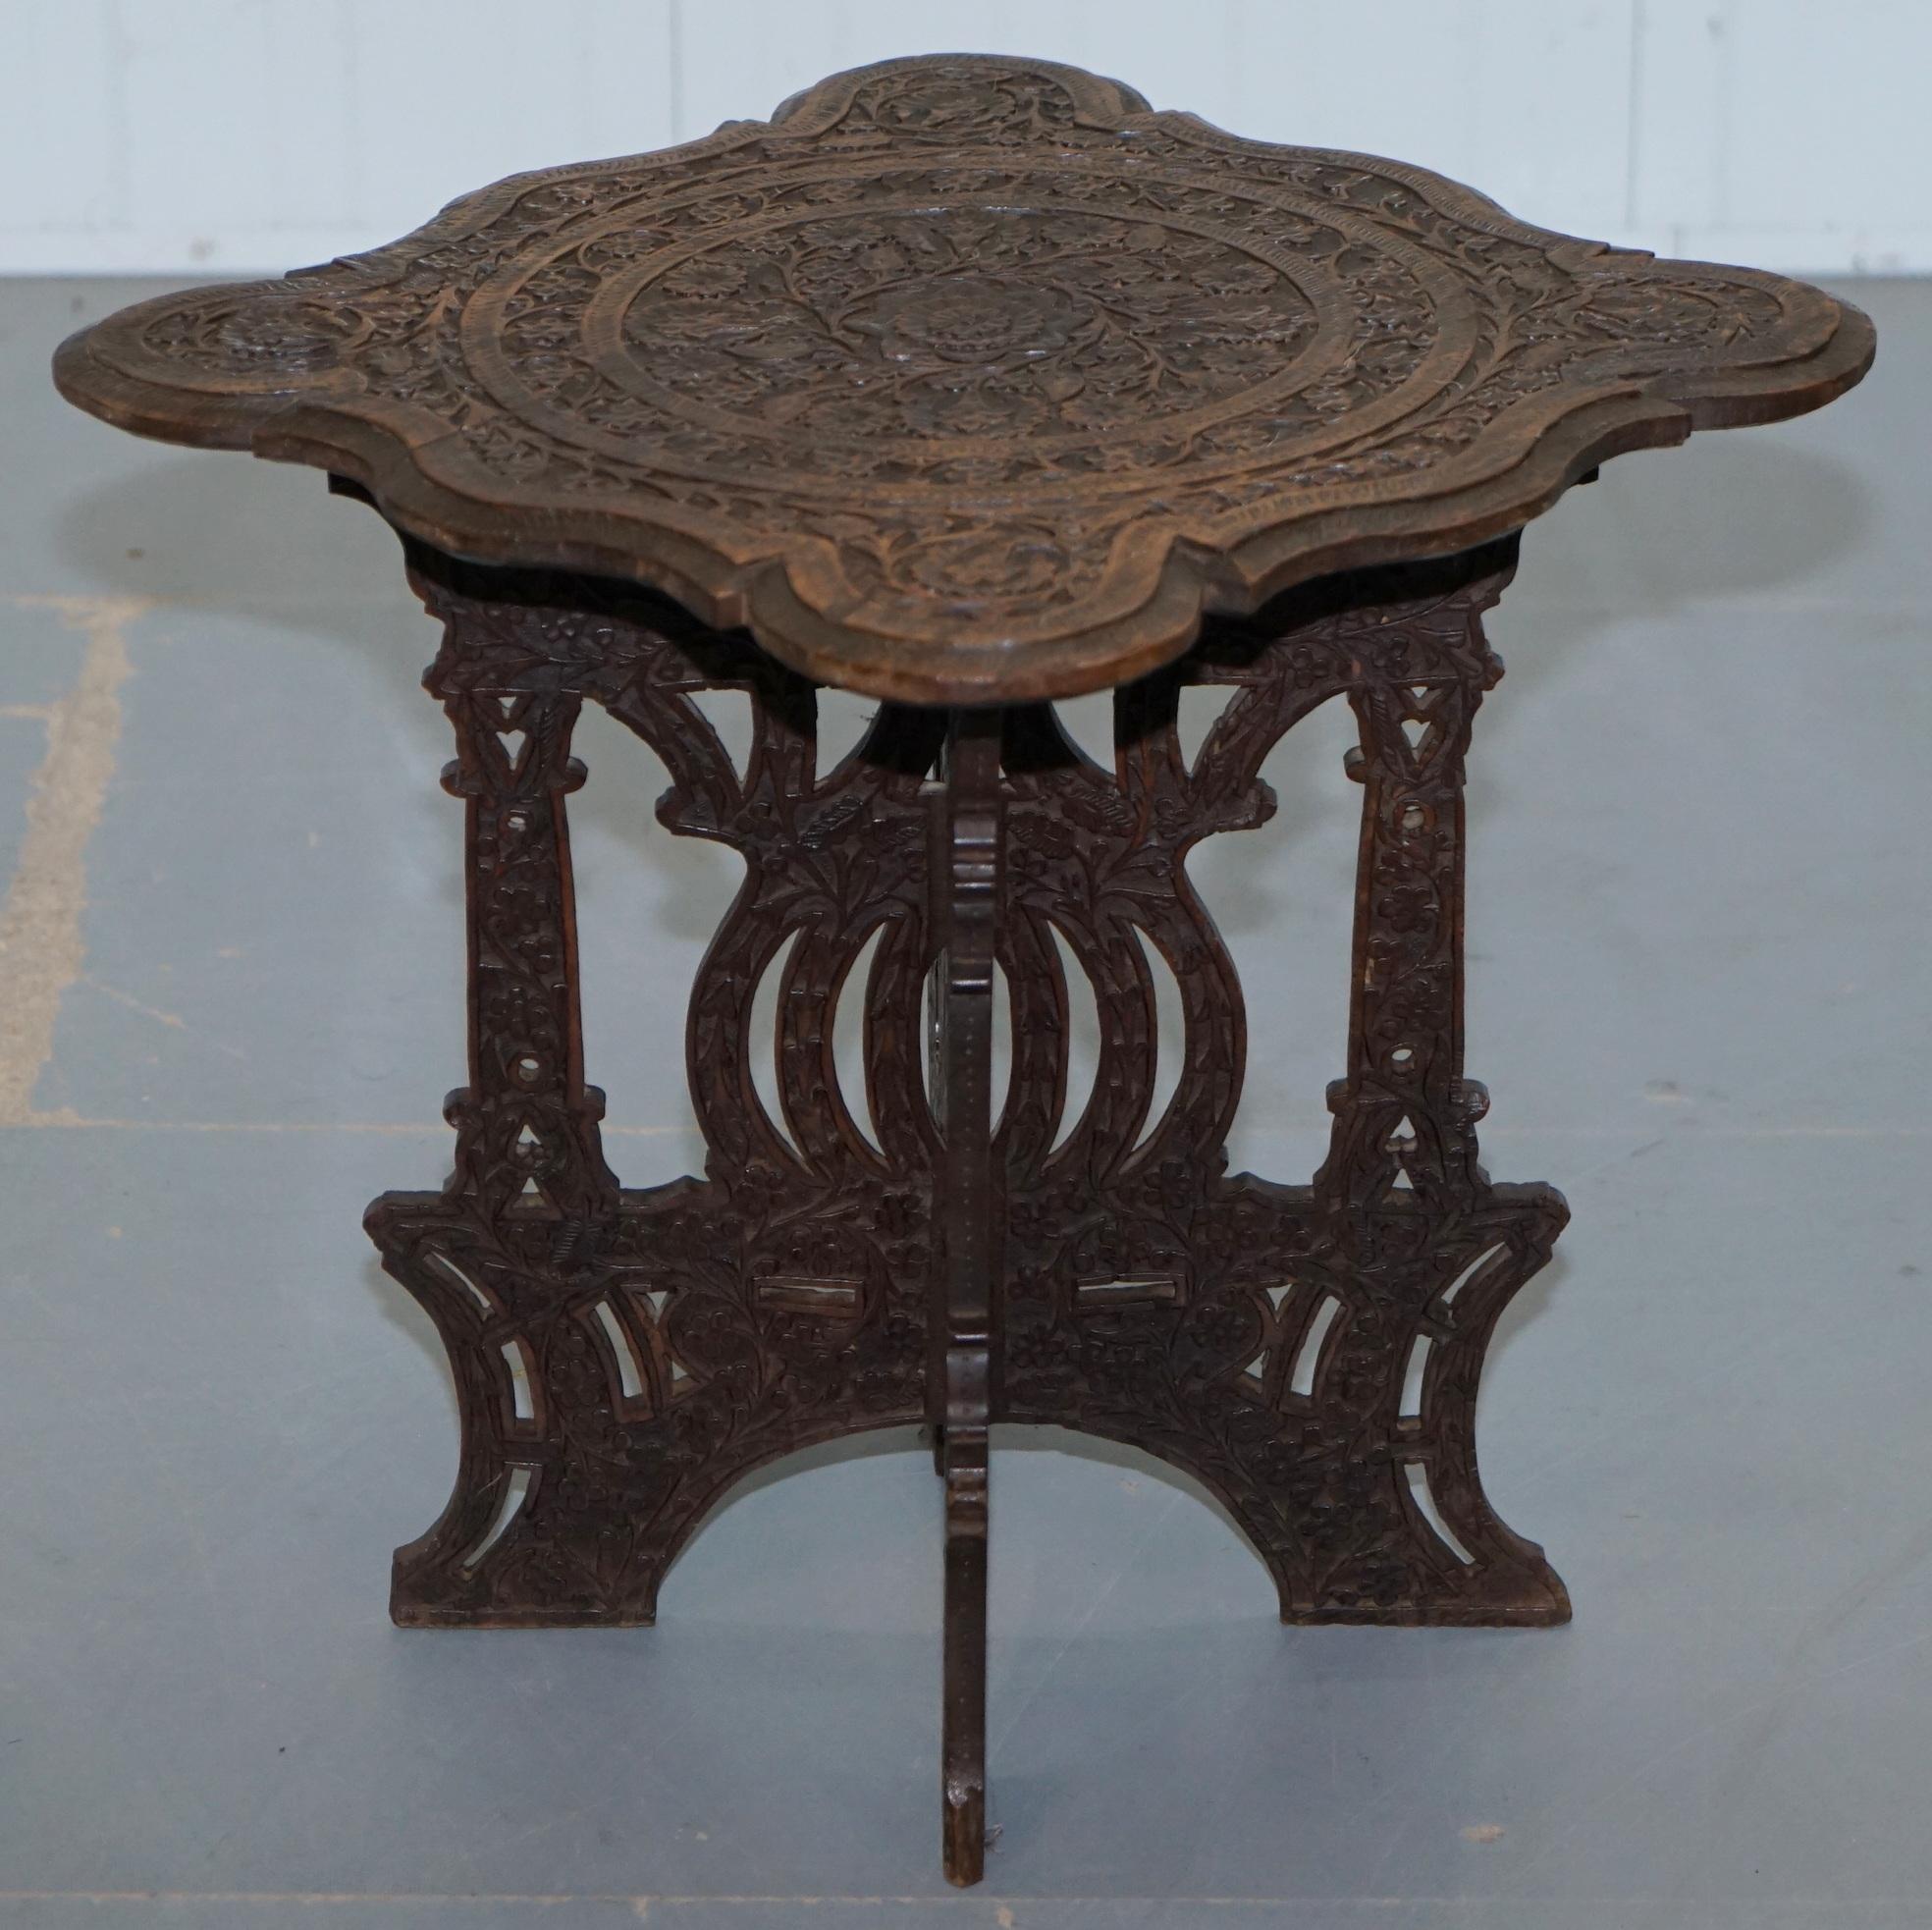 We are delighted to offer for sale this stunning hand carved Anglo Burmese 19th century hardwood side table

A very good looking well made and decorative table, its hand carved from head to toe and looks like pure art furniture from every angle

We